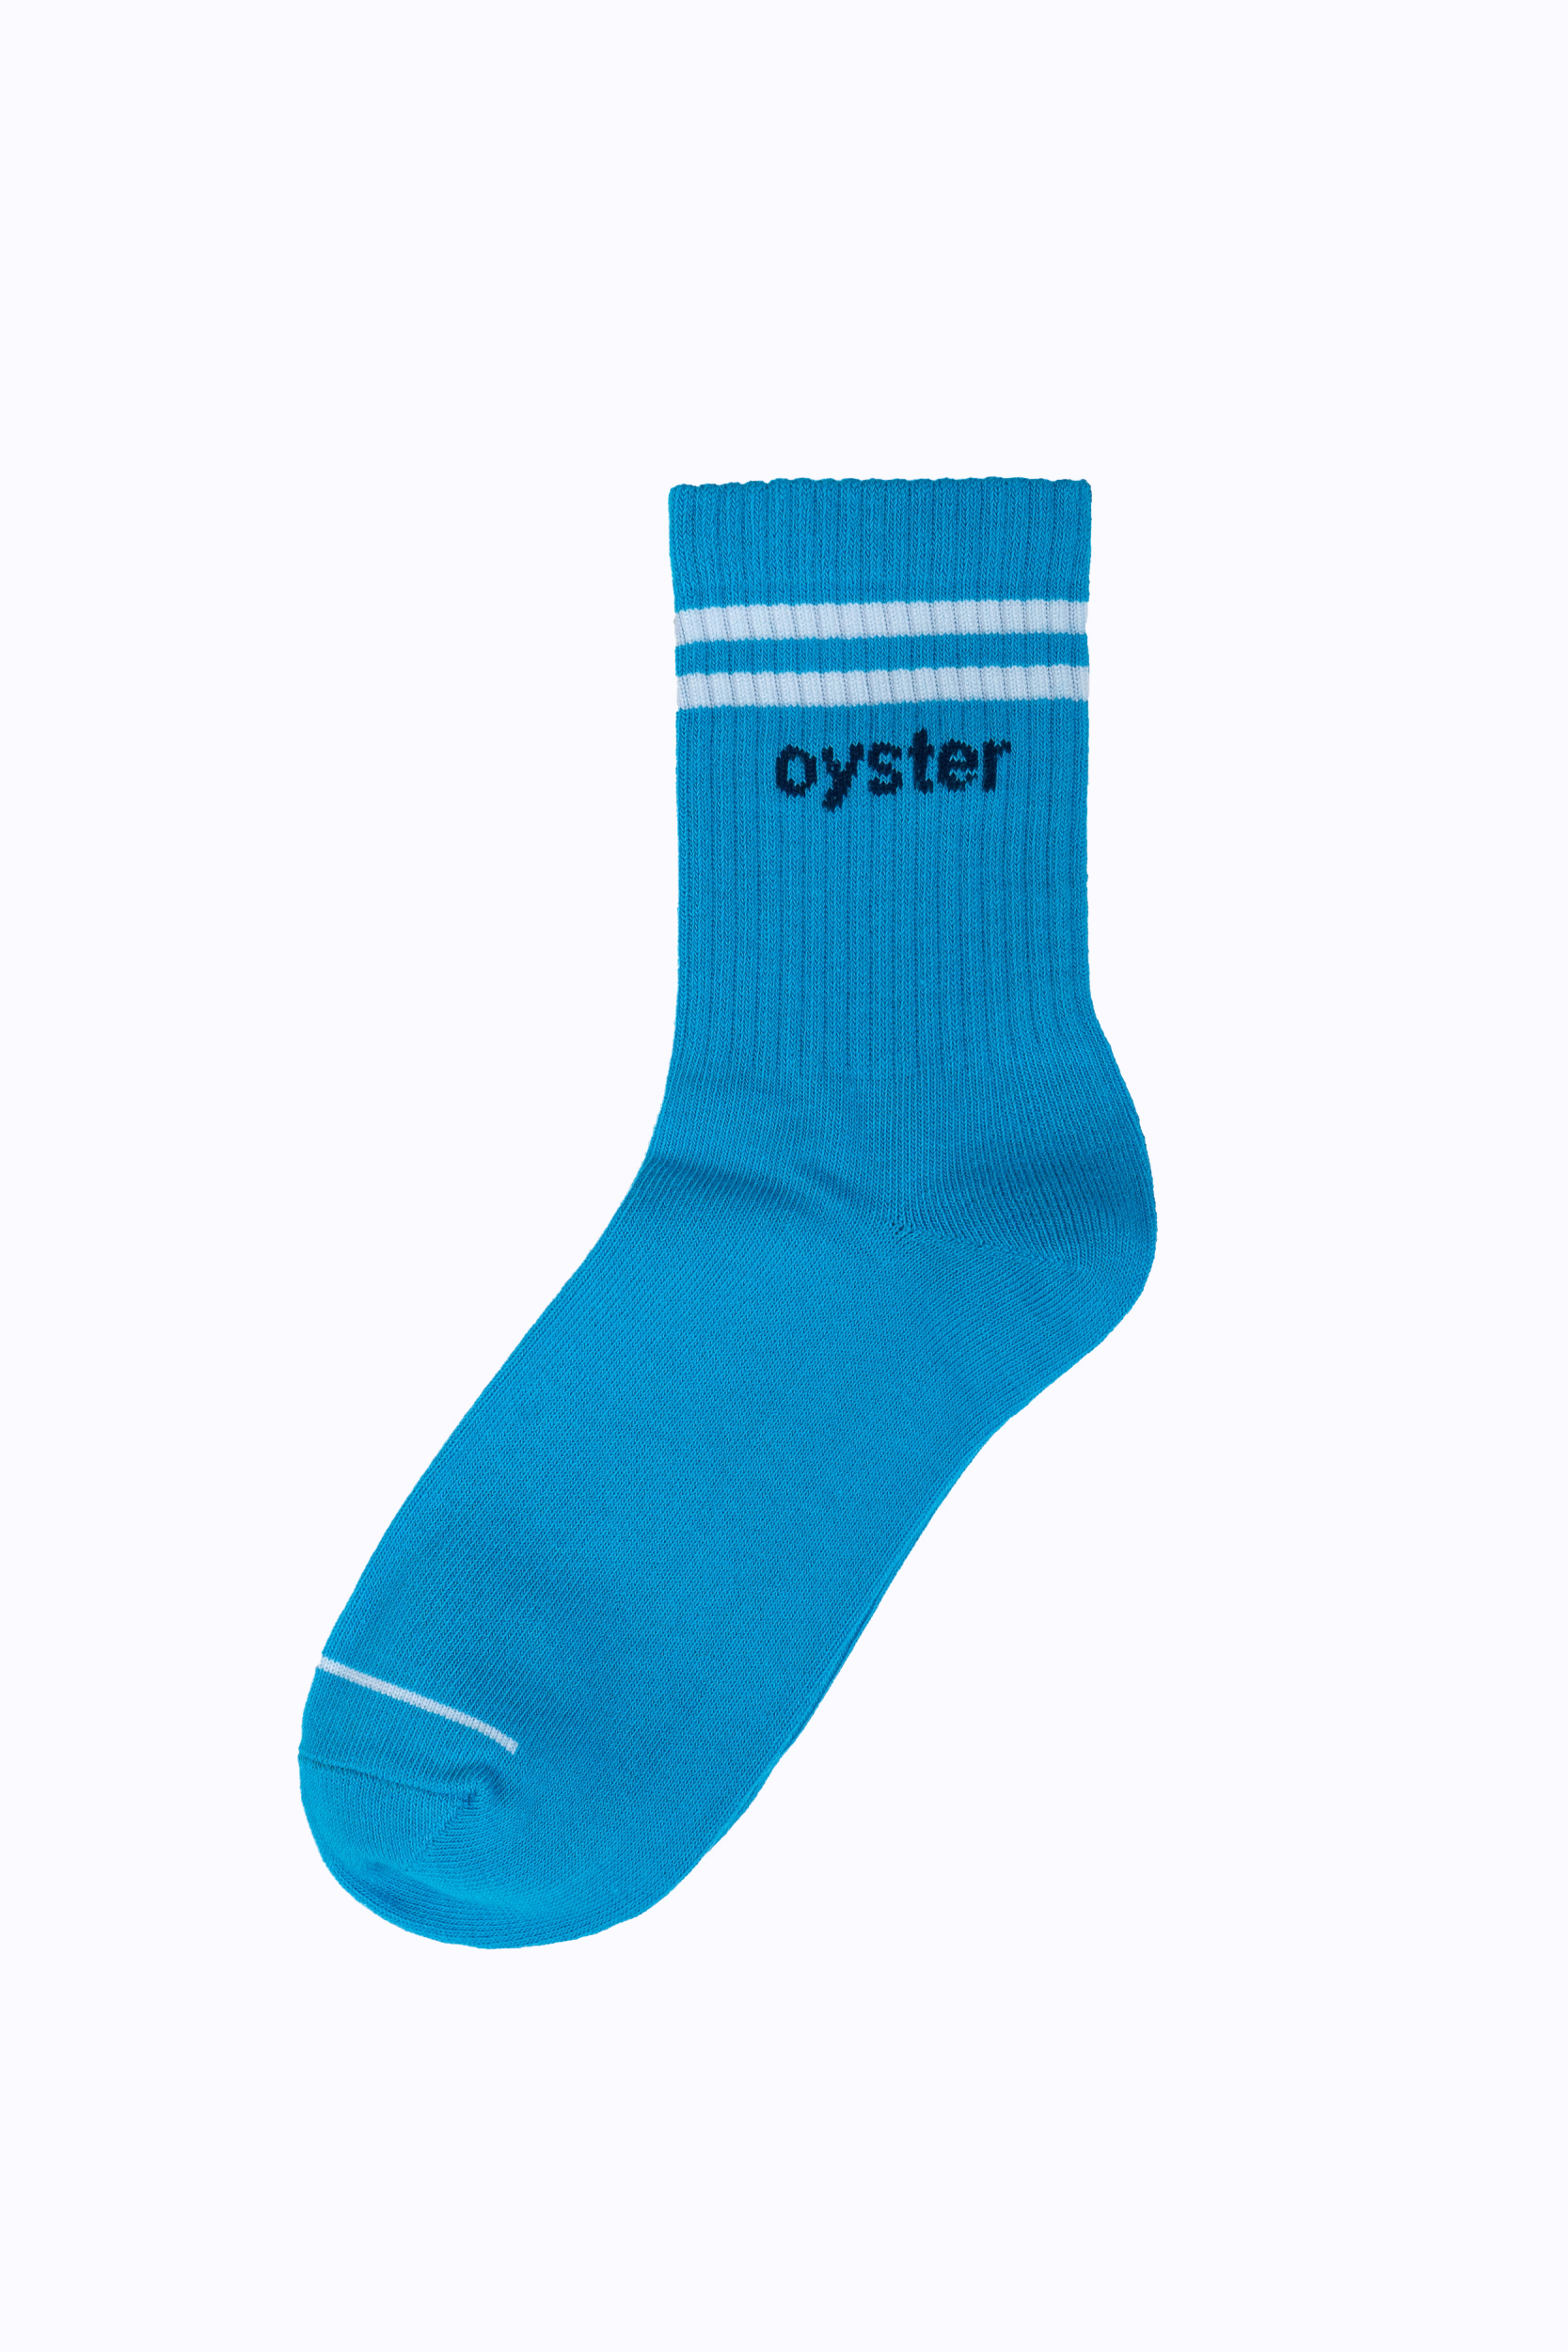 Oyster socks_Turquoise